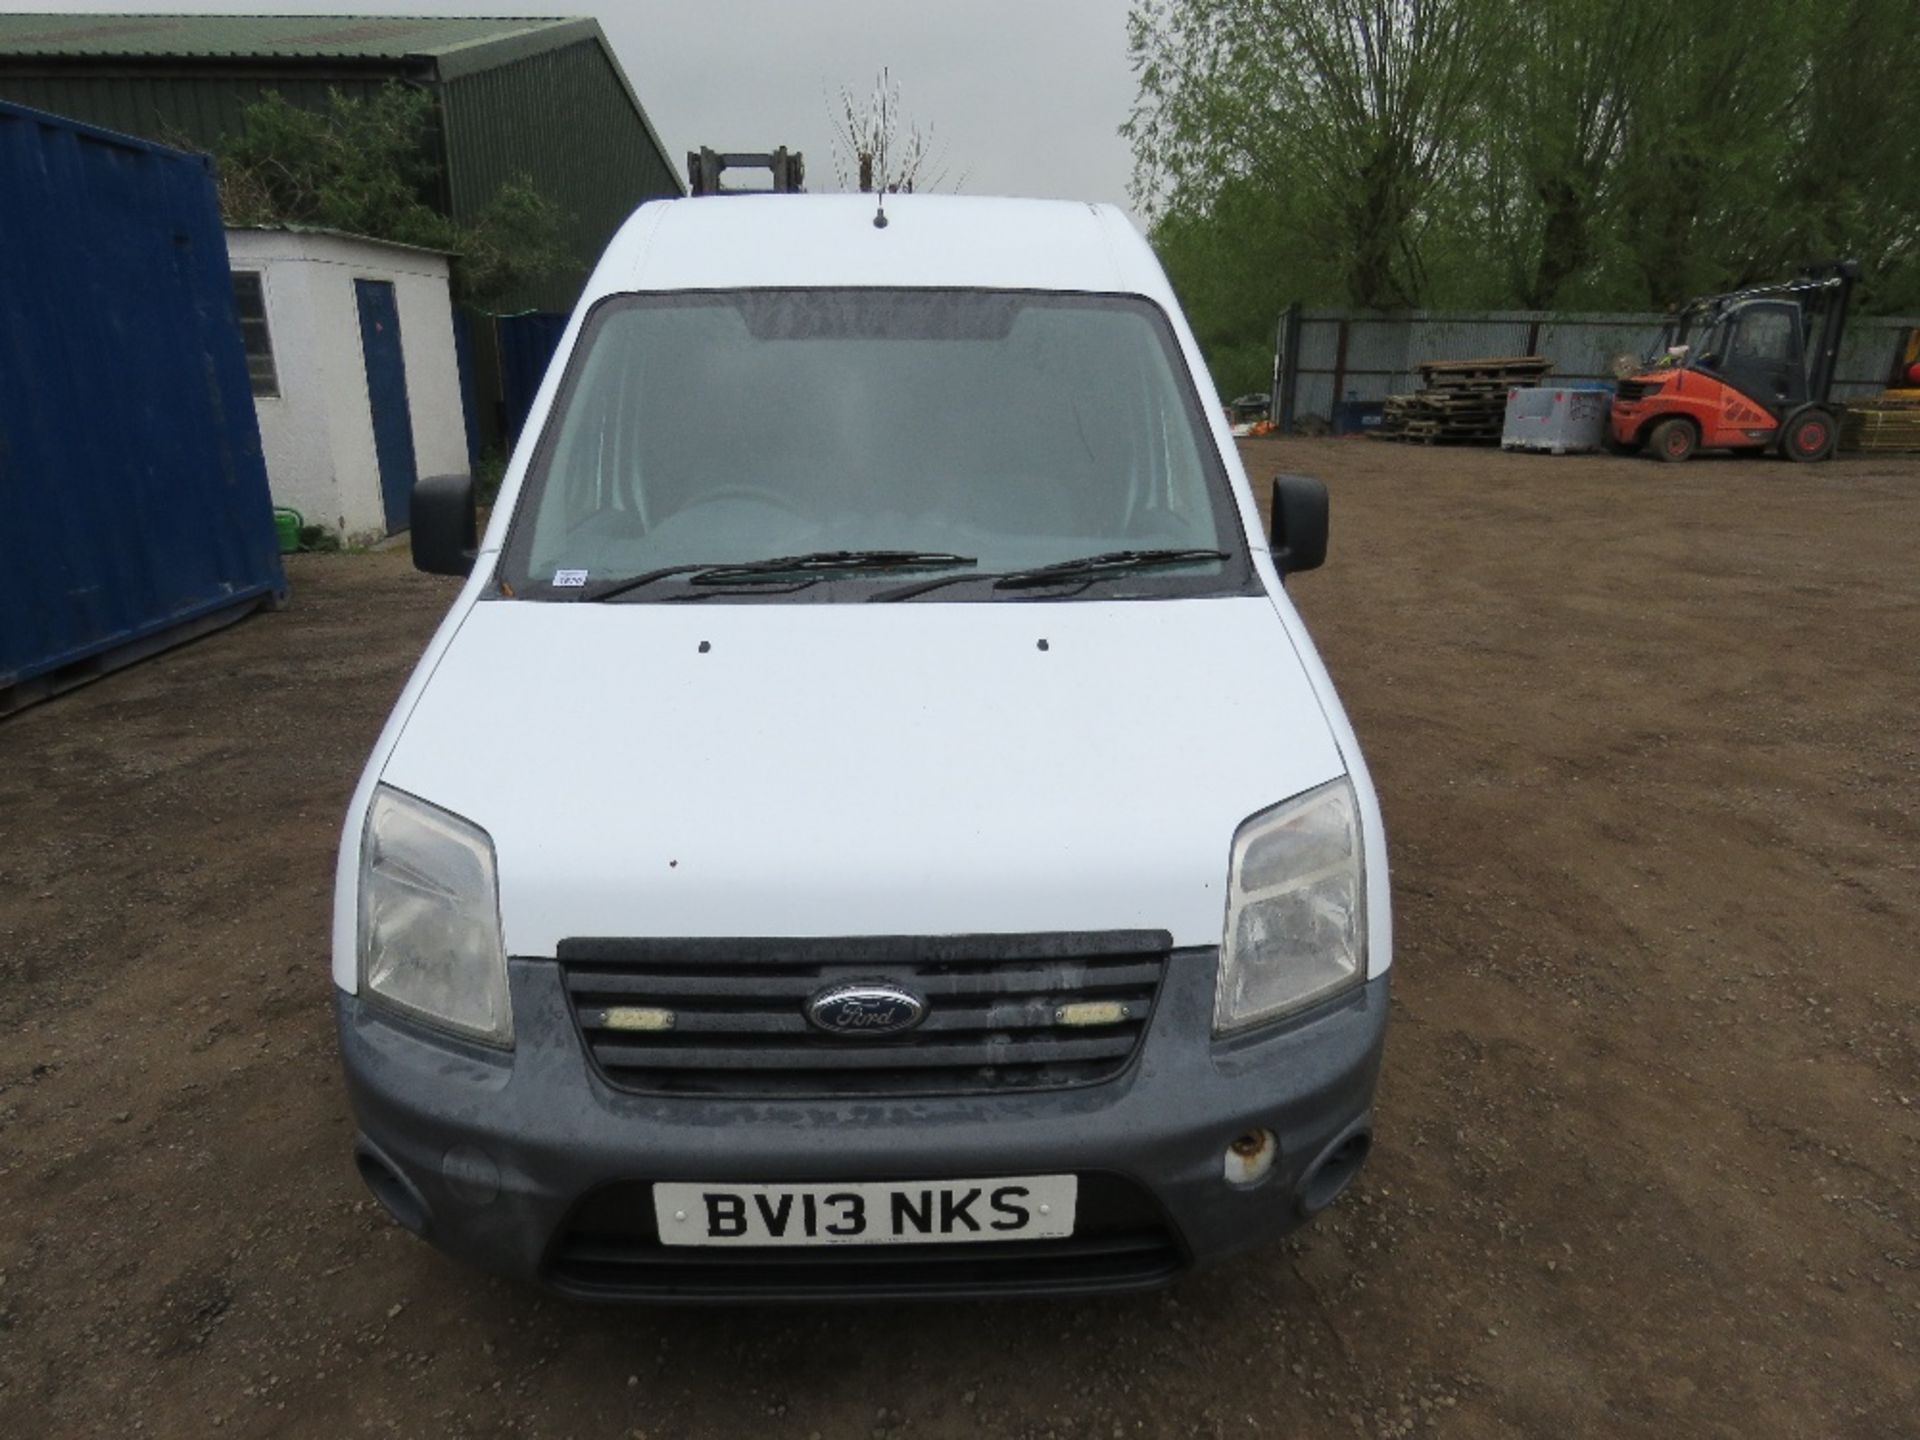 FORD TRANSIT CONNECT PANEL VAN REG:BV13 NKS 1.8LITRE. HIGH ROOF LWB. 83K REC MILES APPROX. WITH V5 A - Image 14 of 26